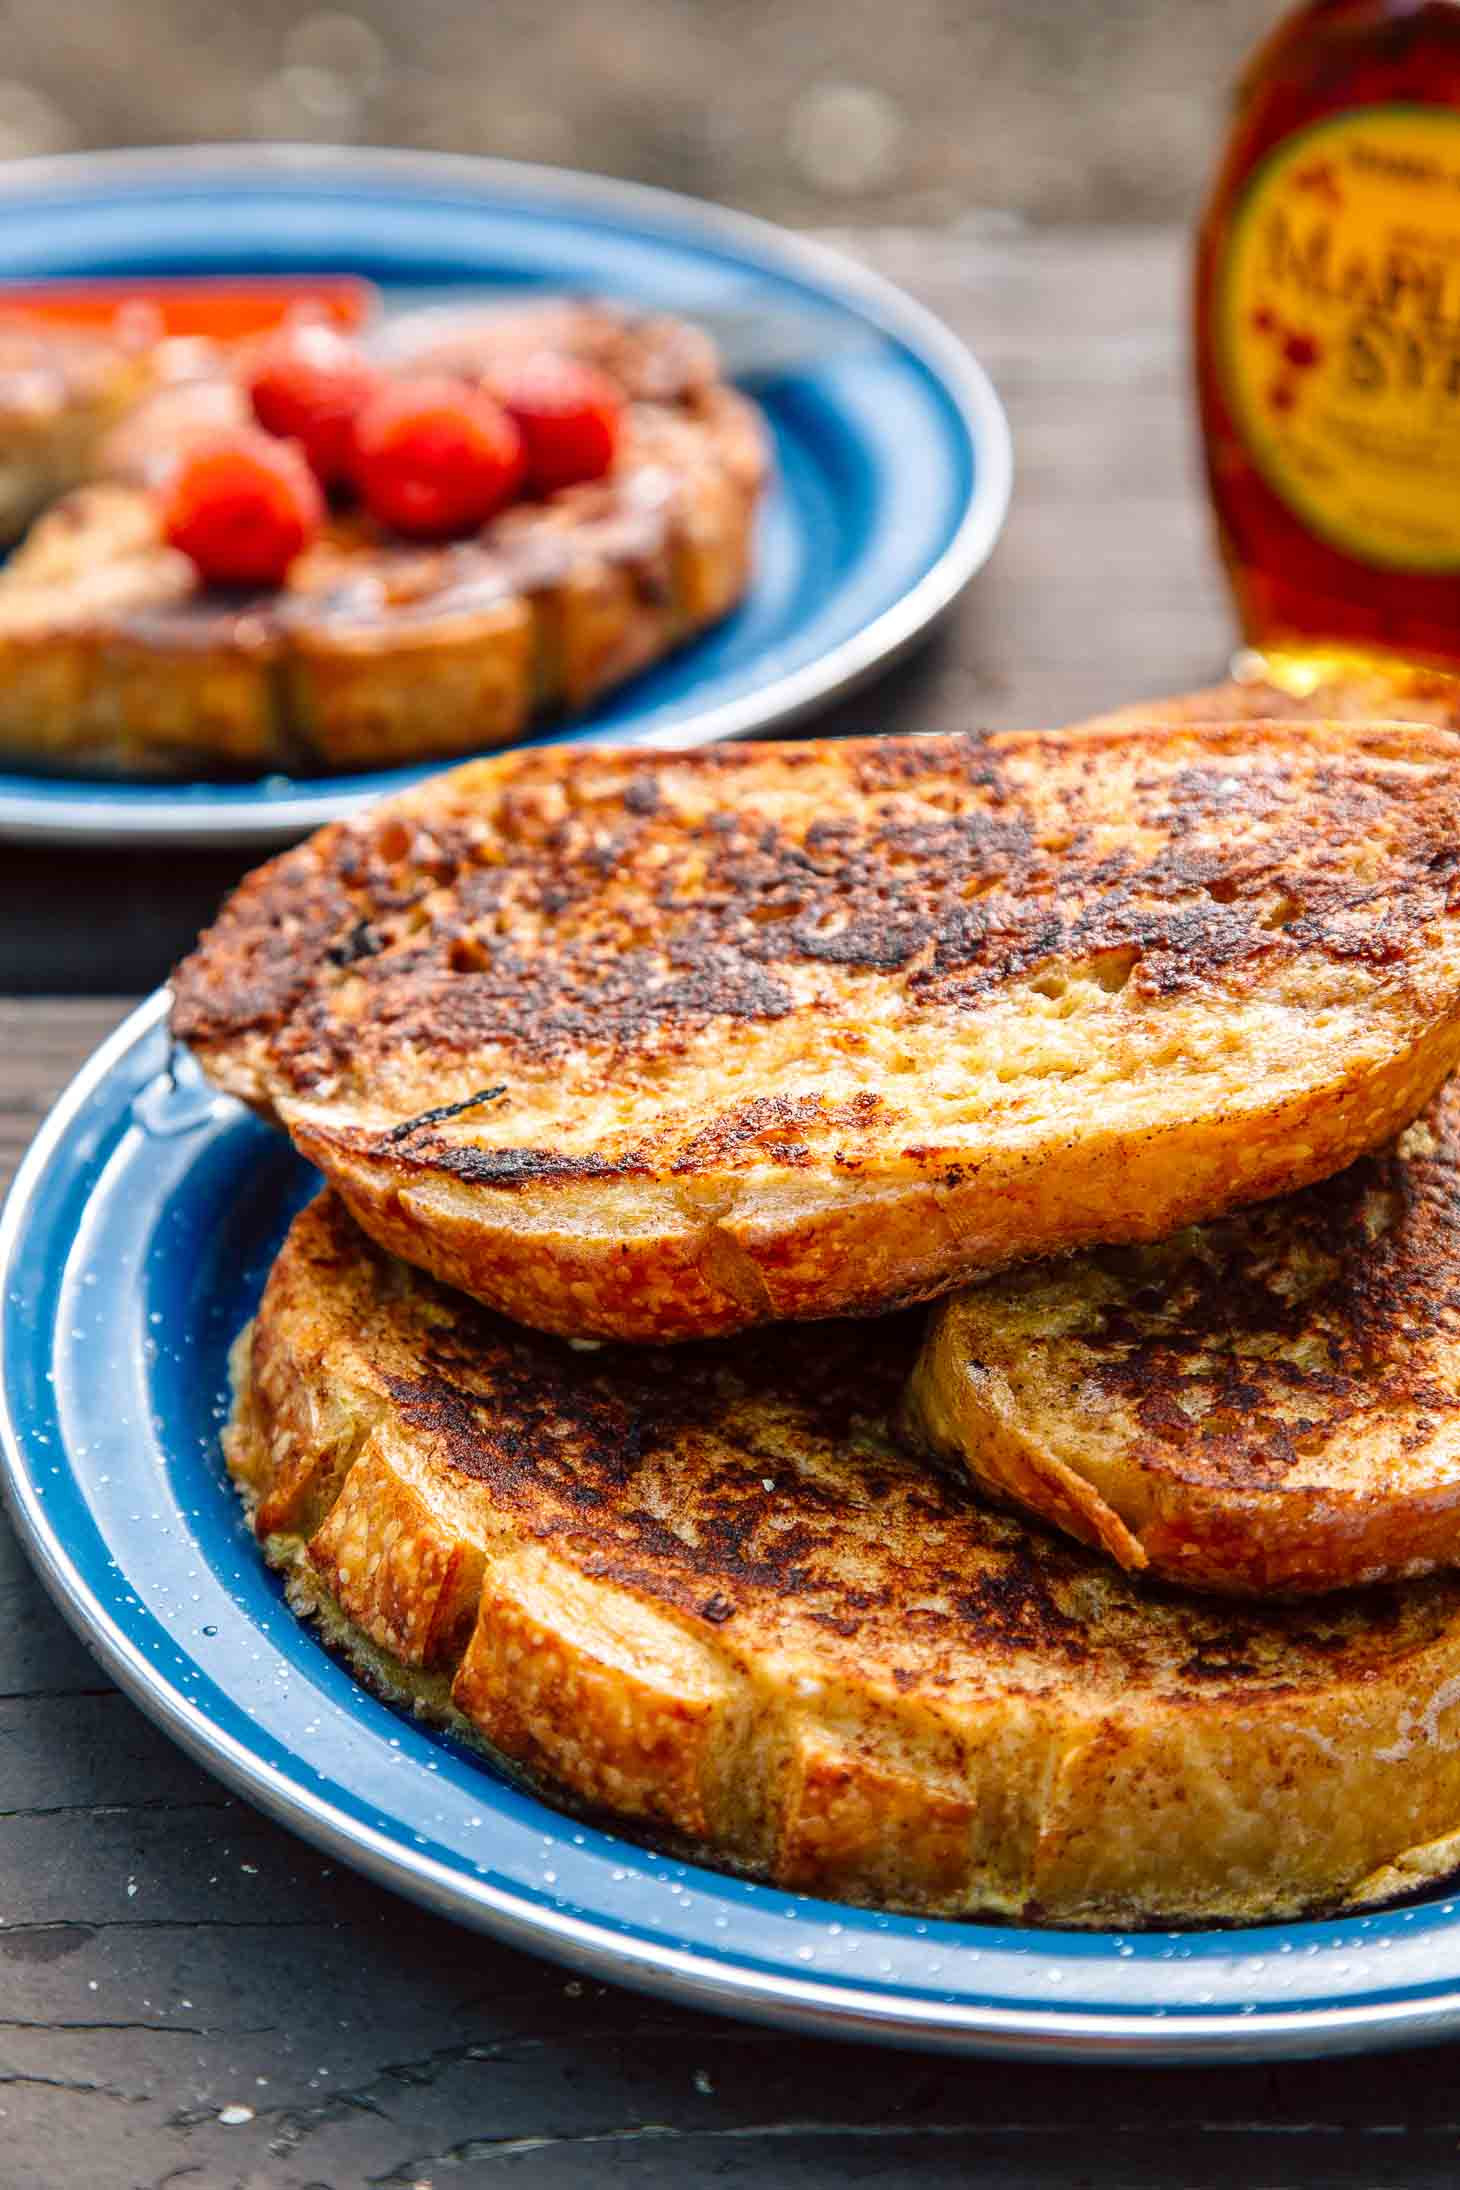 Camping French Toast
 How to Make Perfect French Toast While Camping